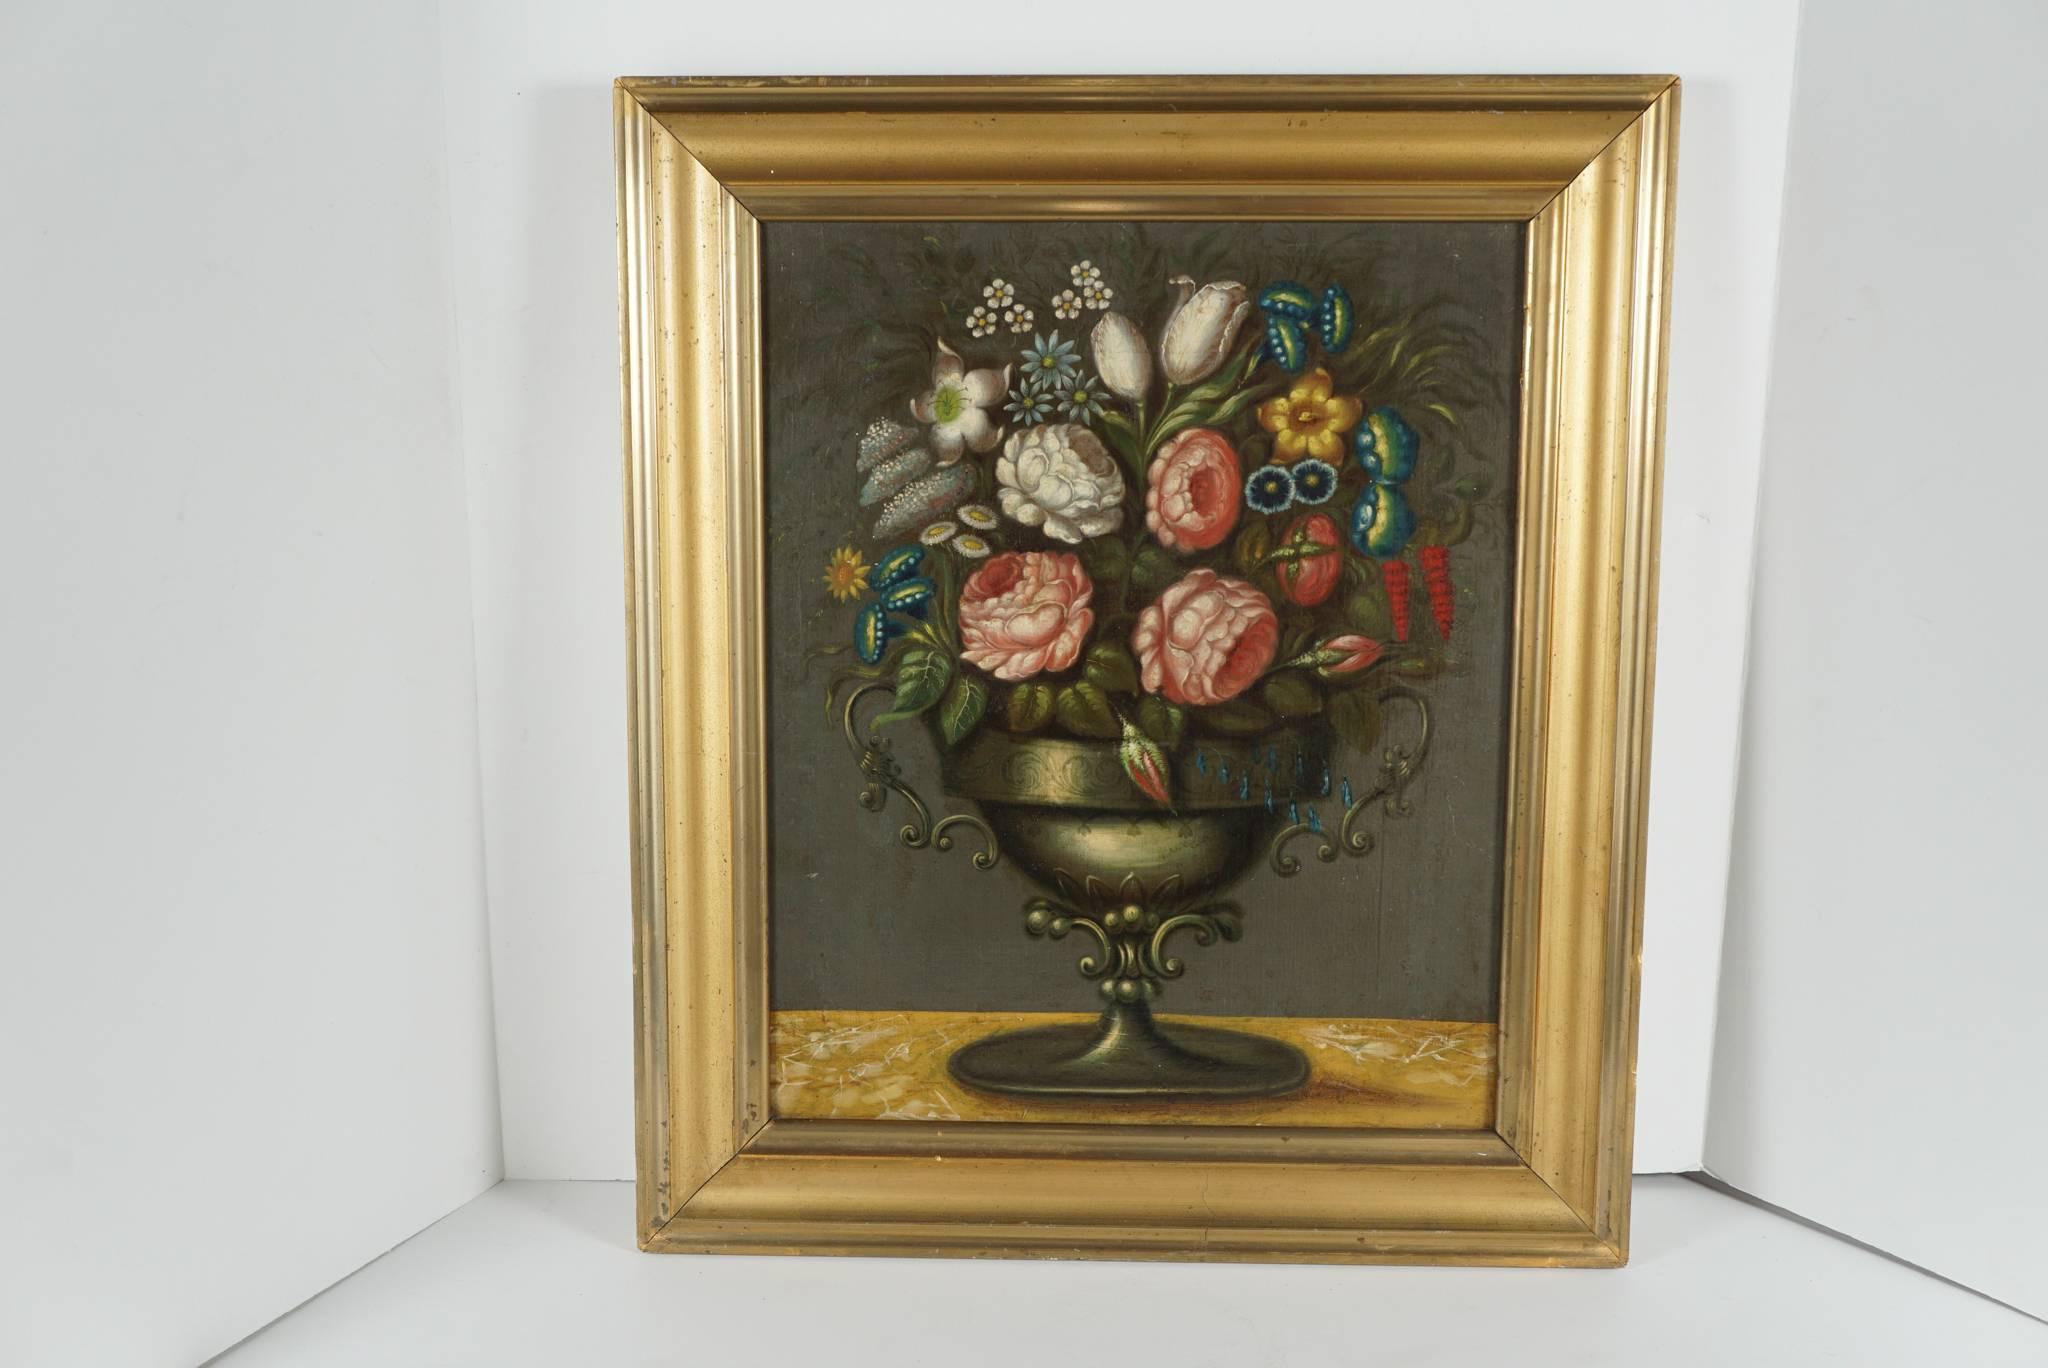 This work an oil on canvas is from the early 19th century. The style and look of the work is attributable to Jean-Louis Prevost a Botanical and fruit painter best known for his compilation of water color botanical studies. He also has done a number